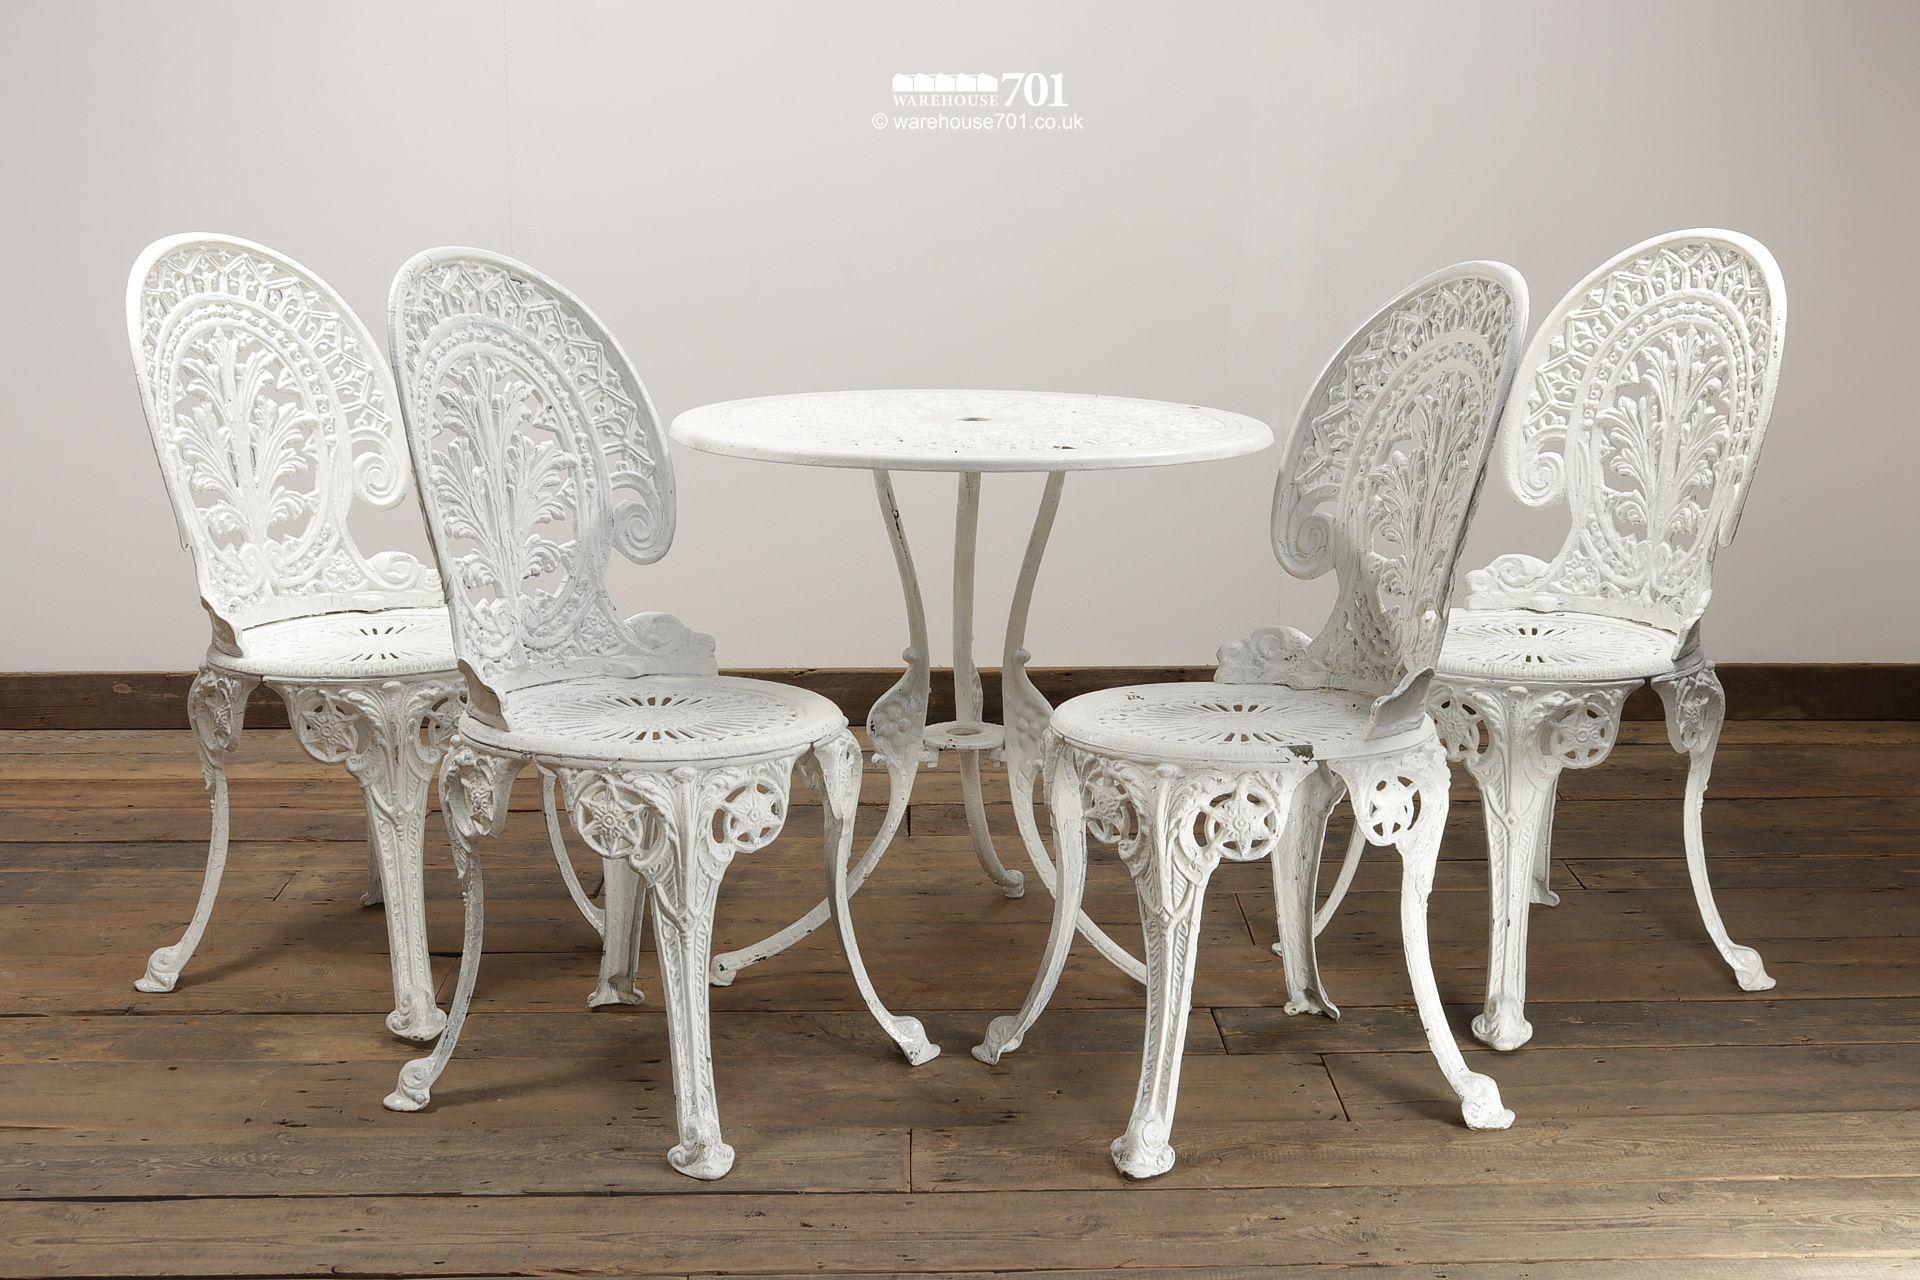 Vintage White Cast Garden Table and Chairs #3